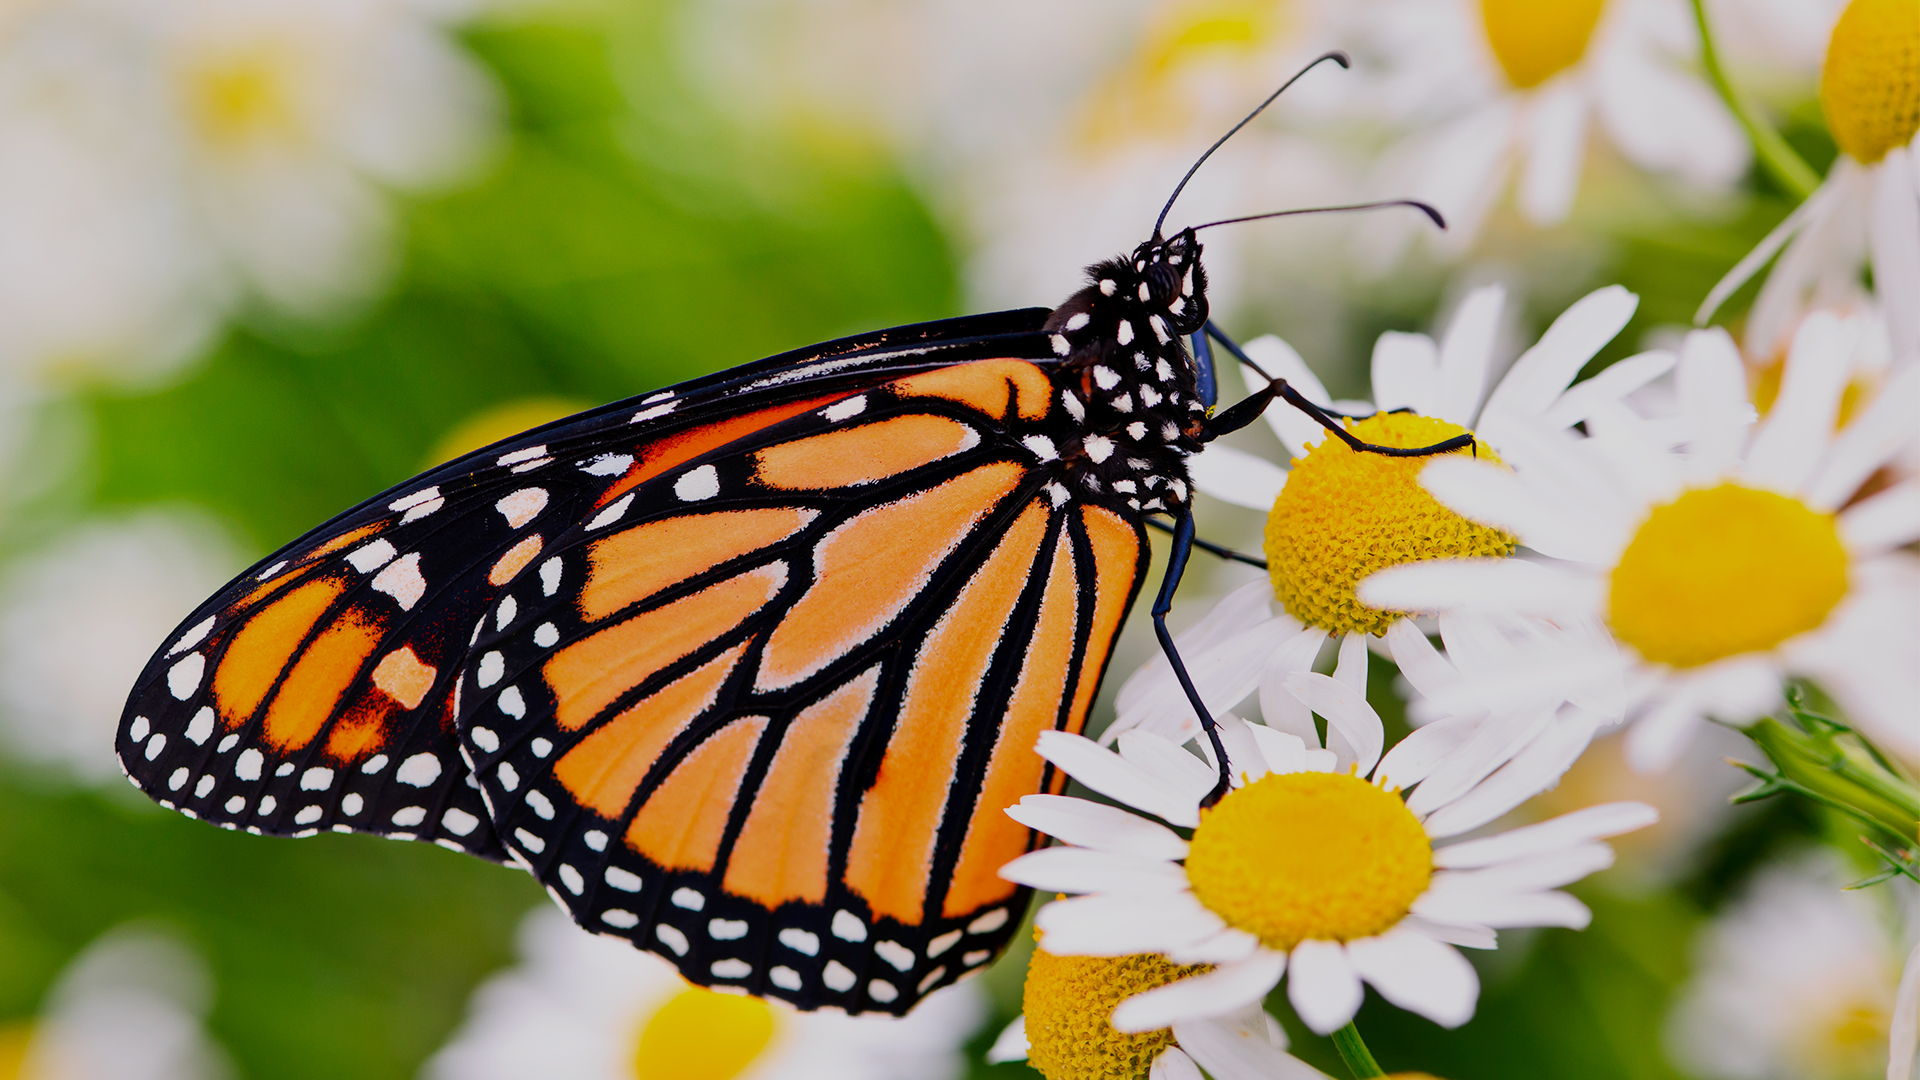 Monarch butterfly perched on a daisy